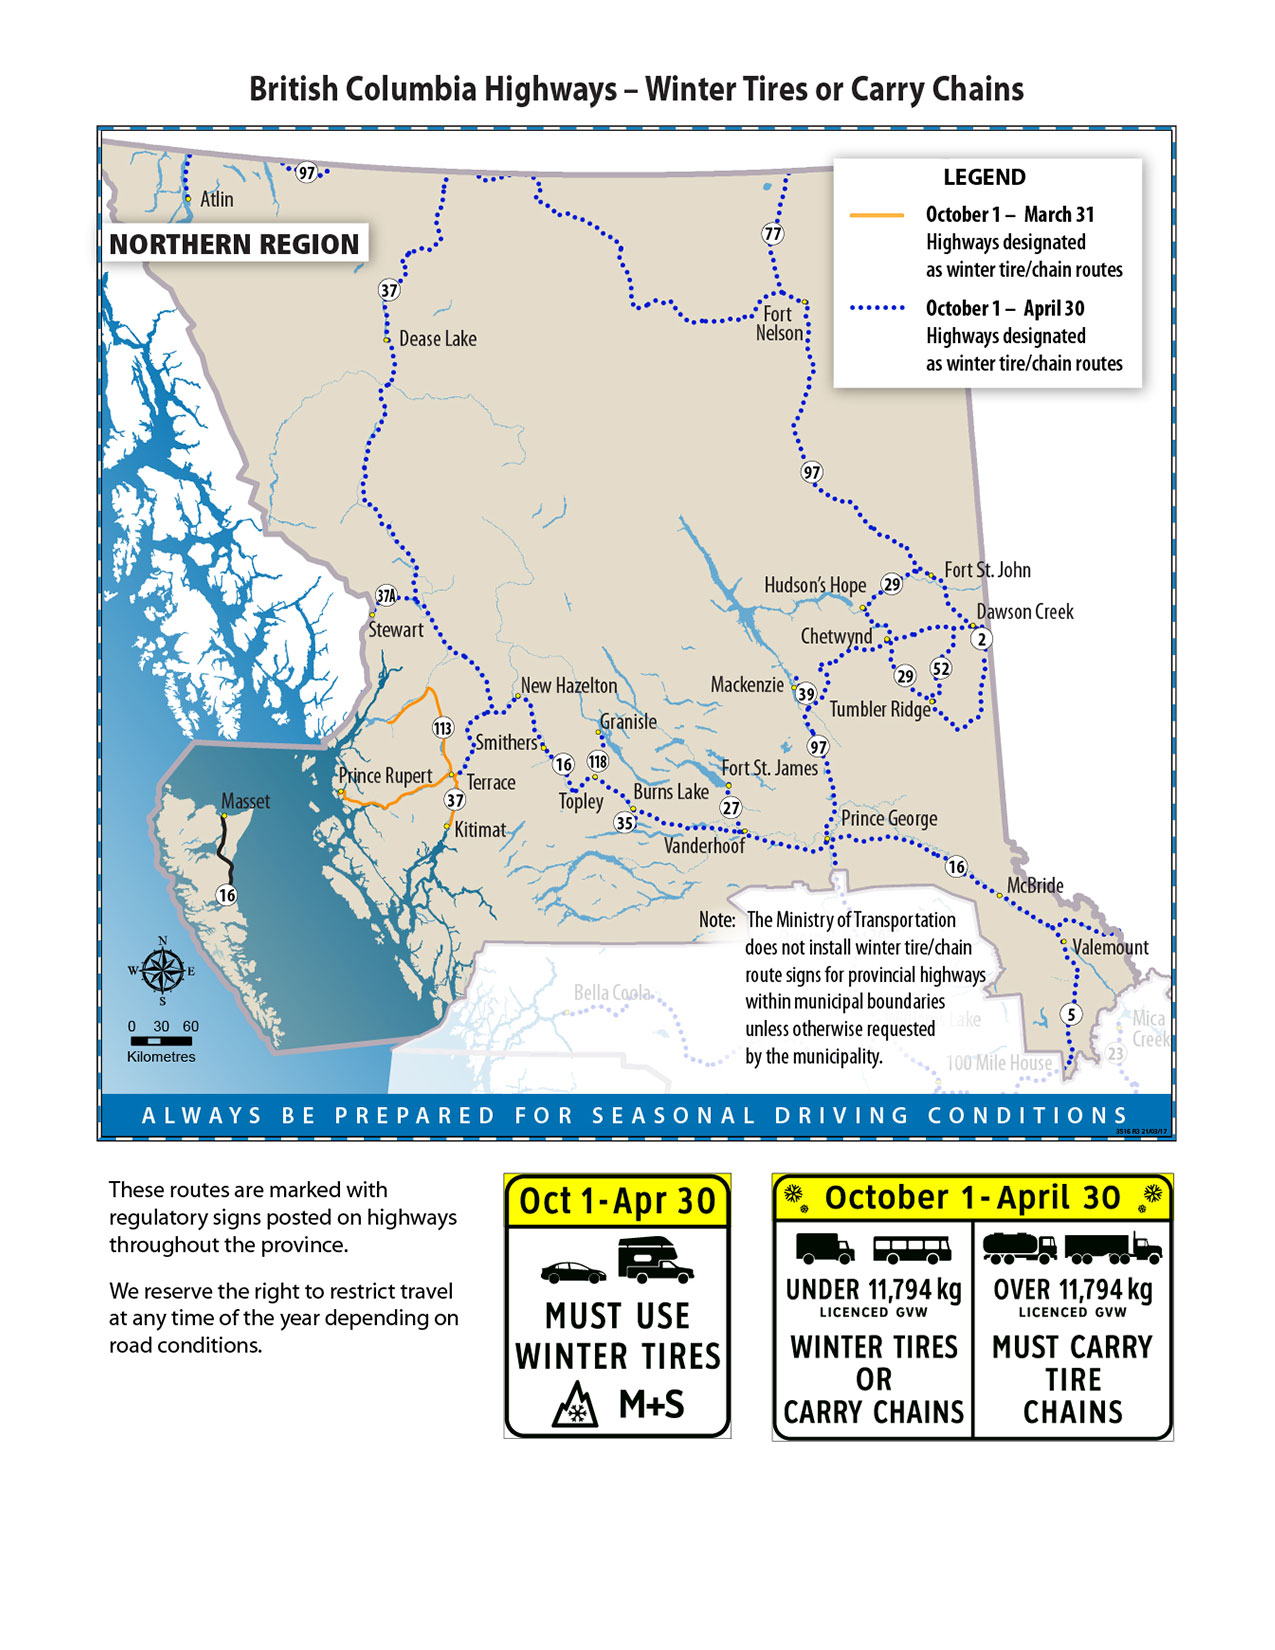 Northern Region map of winter tires and chains requirements